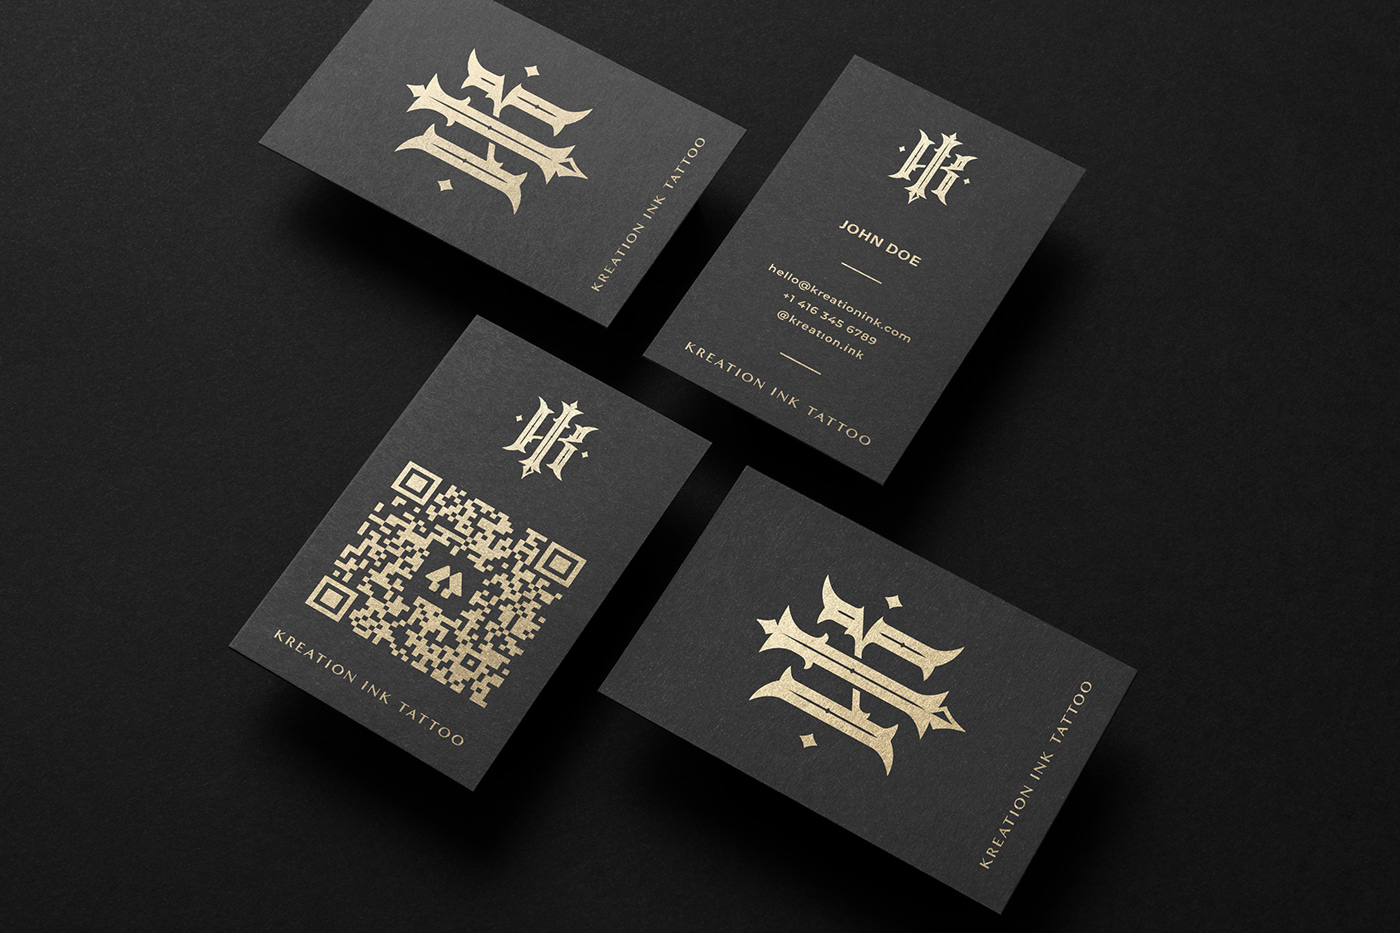 Kreation Ink Tattoo business card design with fully working QR code that leads to Linktree profile